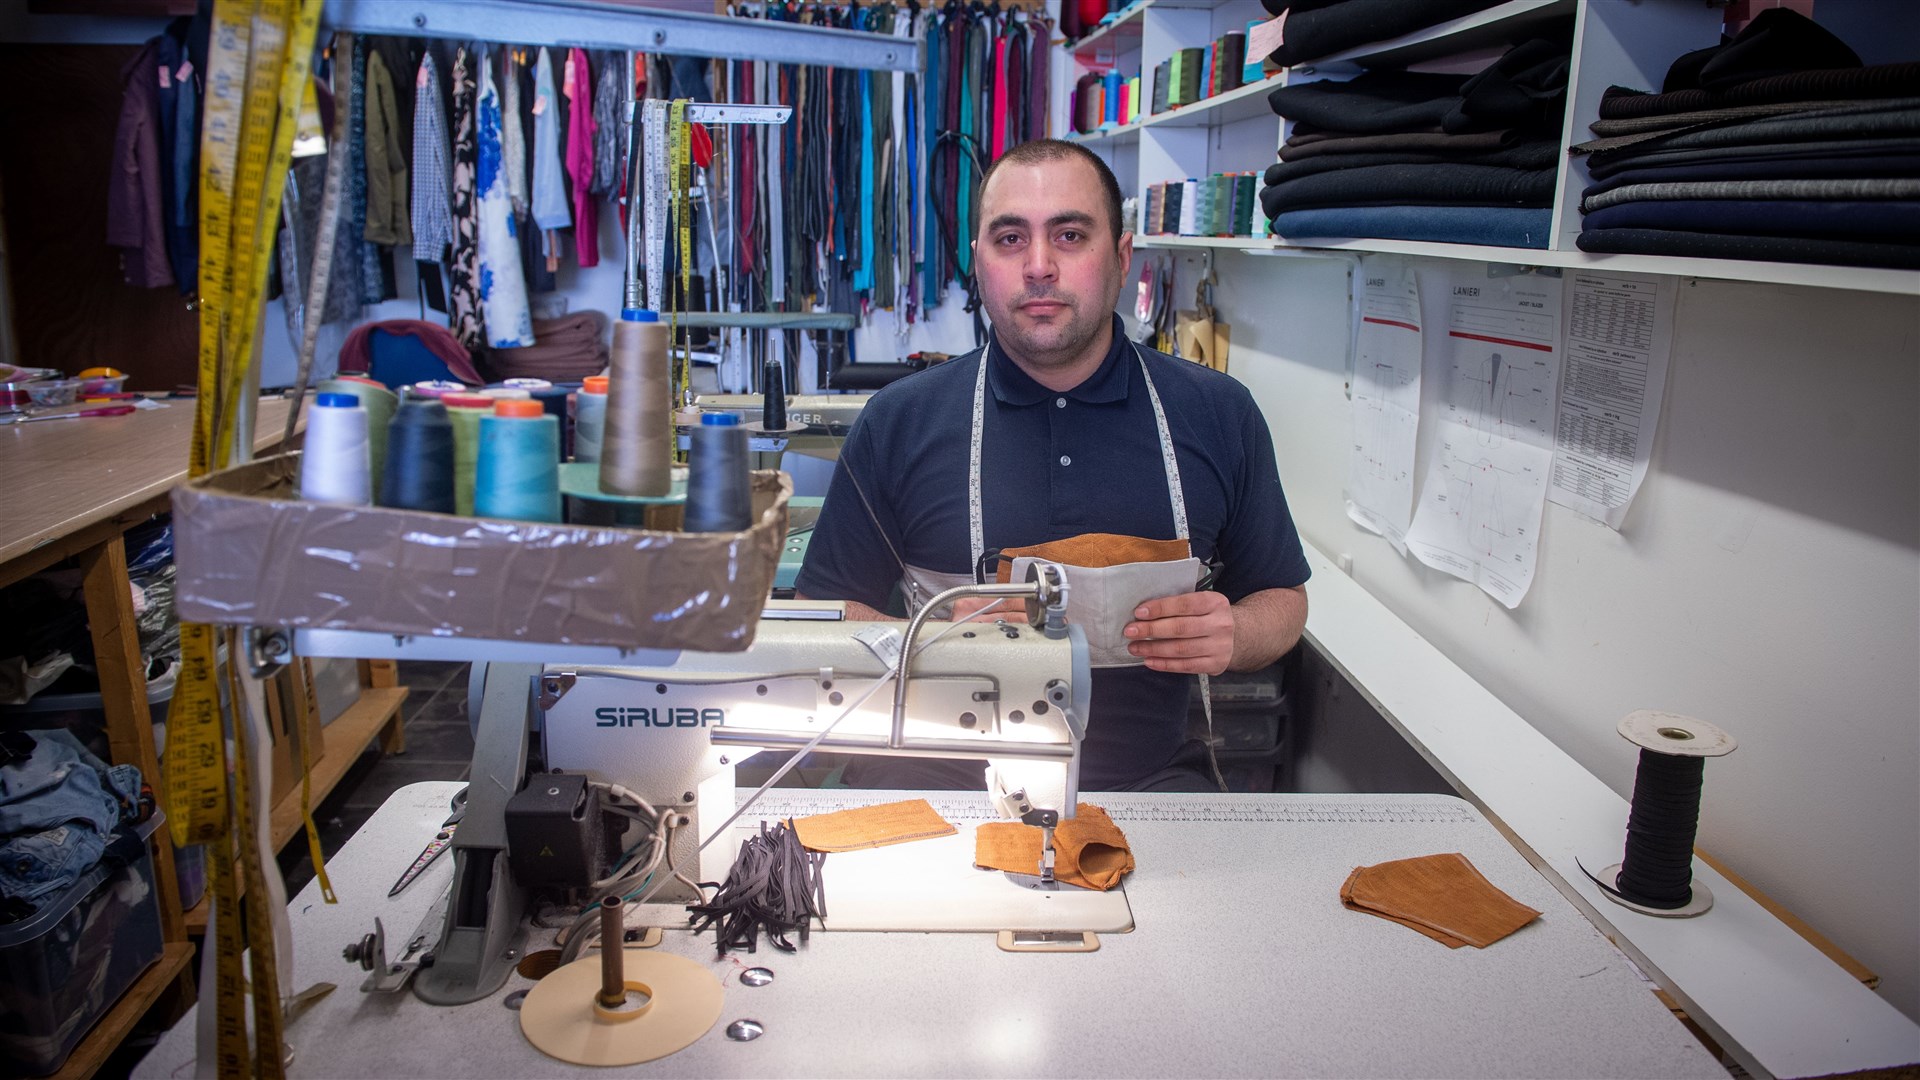 Yusuf Semzi, of Master Tailors in Dingwall, has been making face masks and giving them away for free to locals. Picture: Callum Mackay